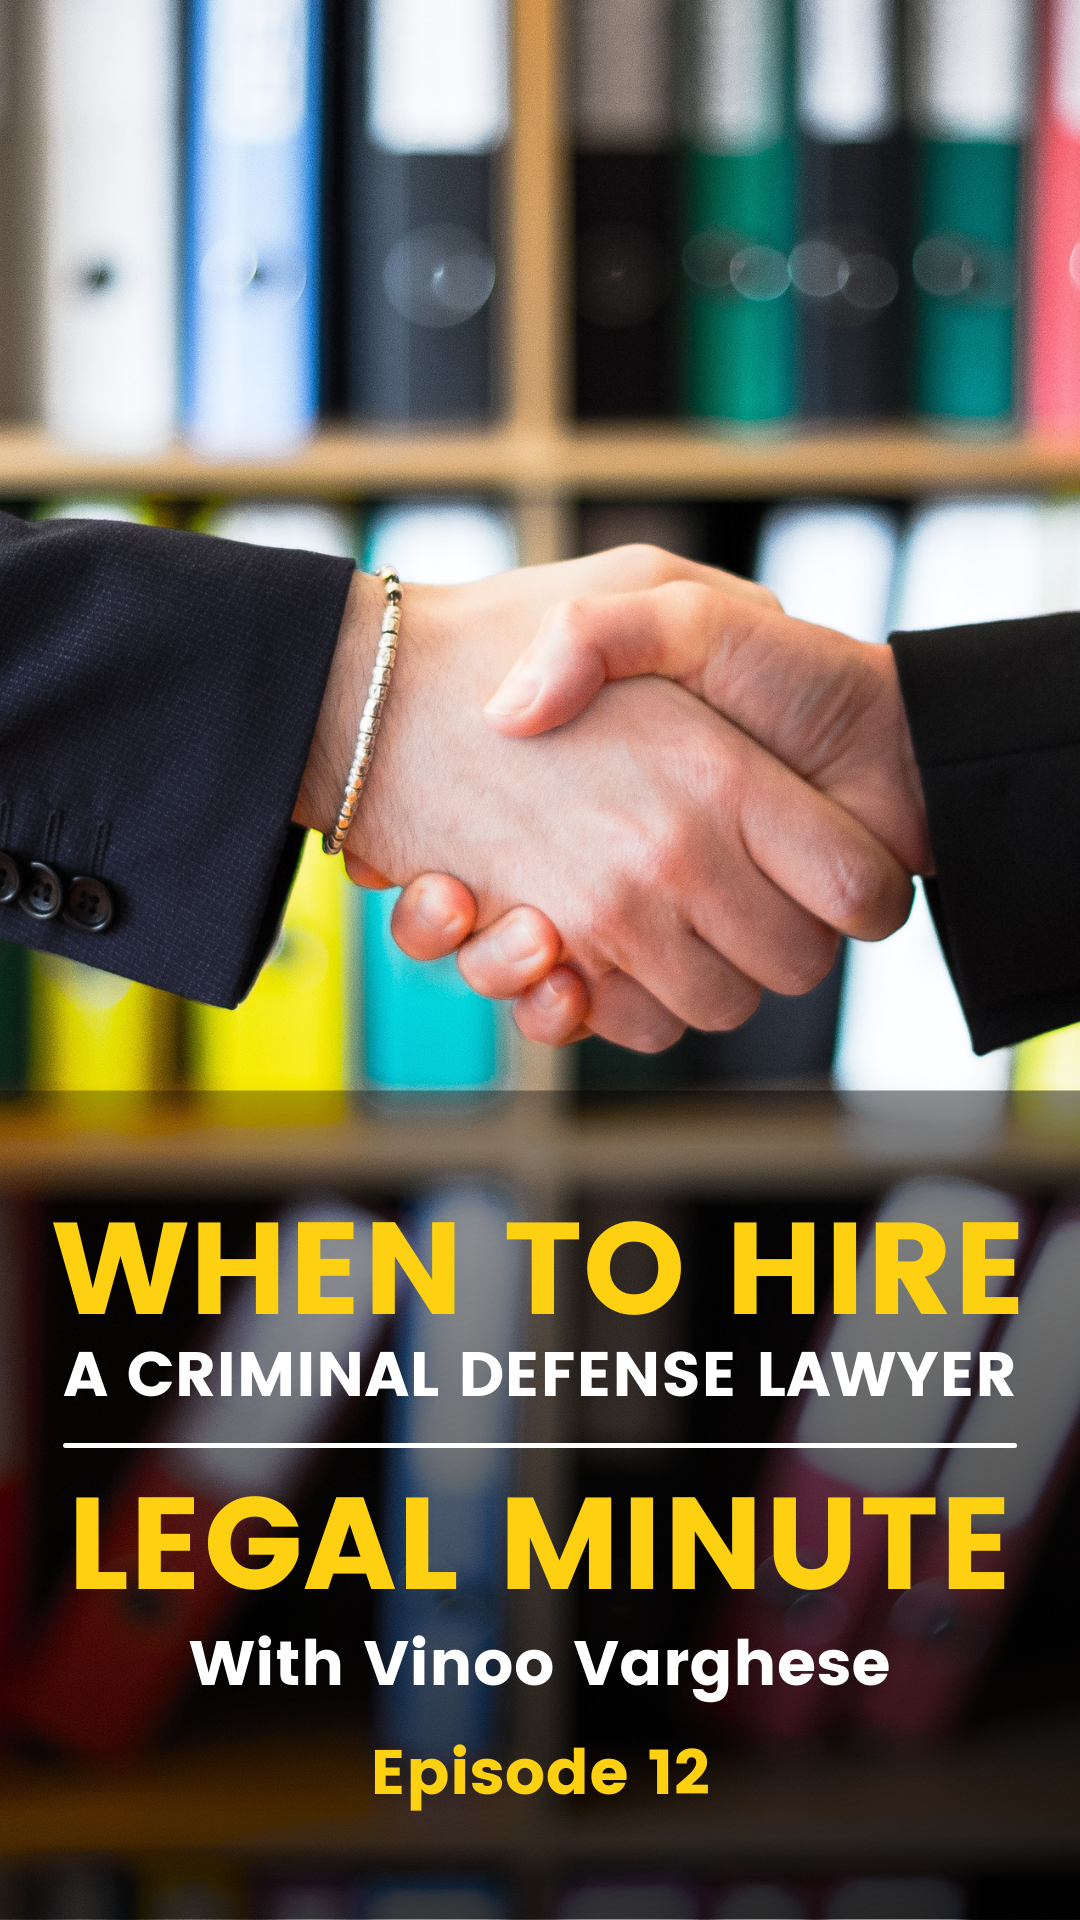 When to hire a criminal defense lawyer